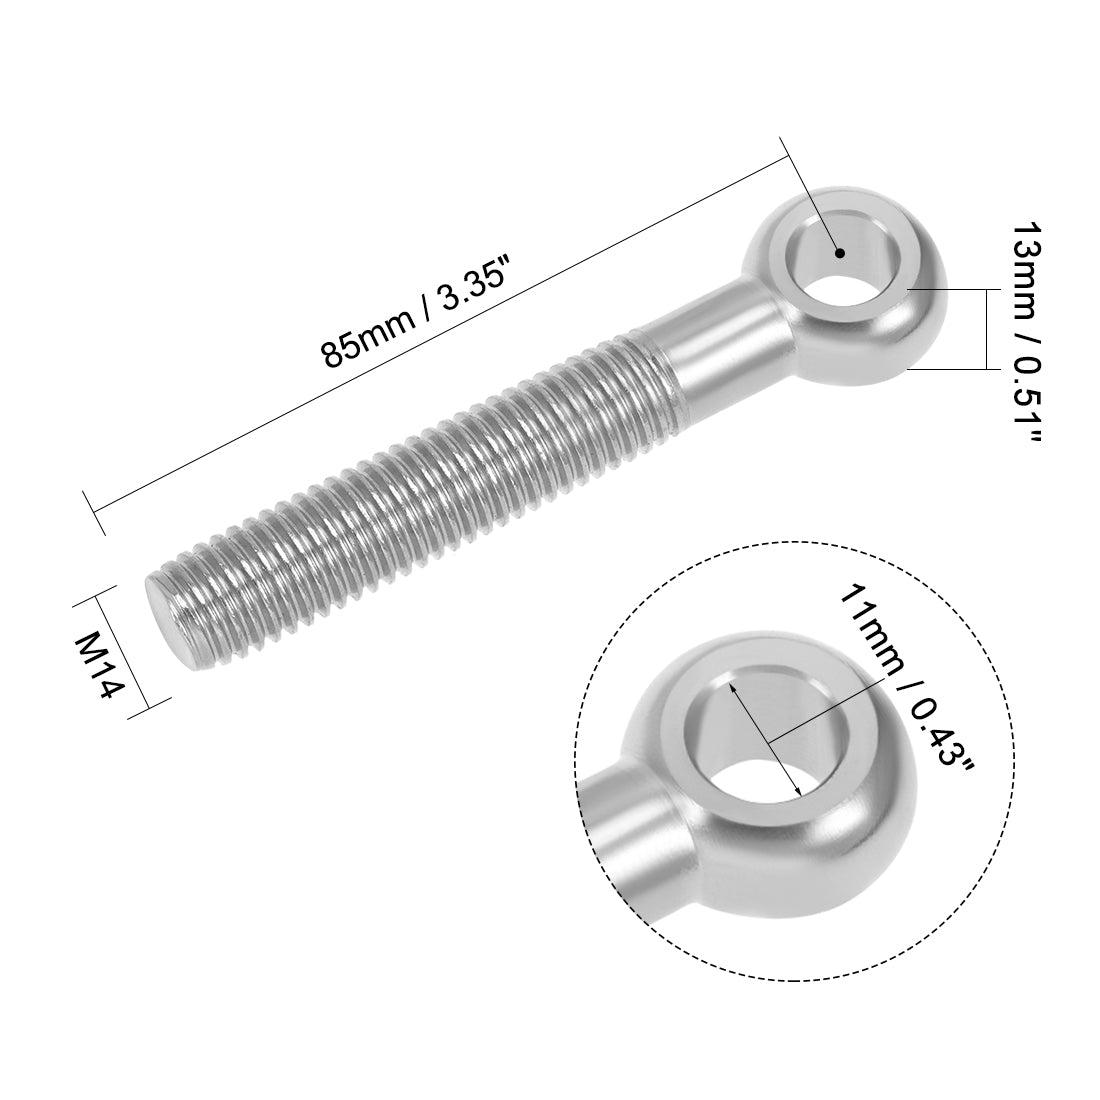 uxcell Uxcell M14 x 85mm Machinery Shoulder Swing Lifting Eye Bolt 304 Stainless Steel Metric Thread 2pcs